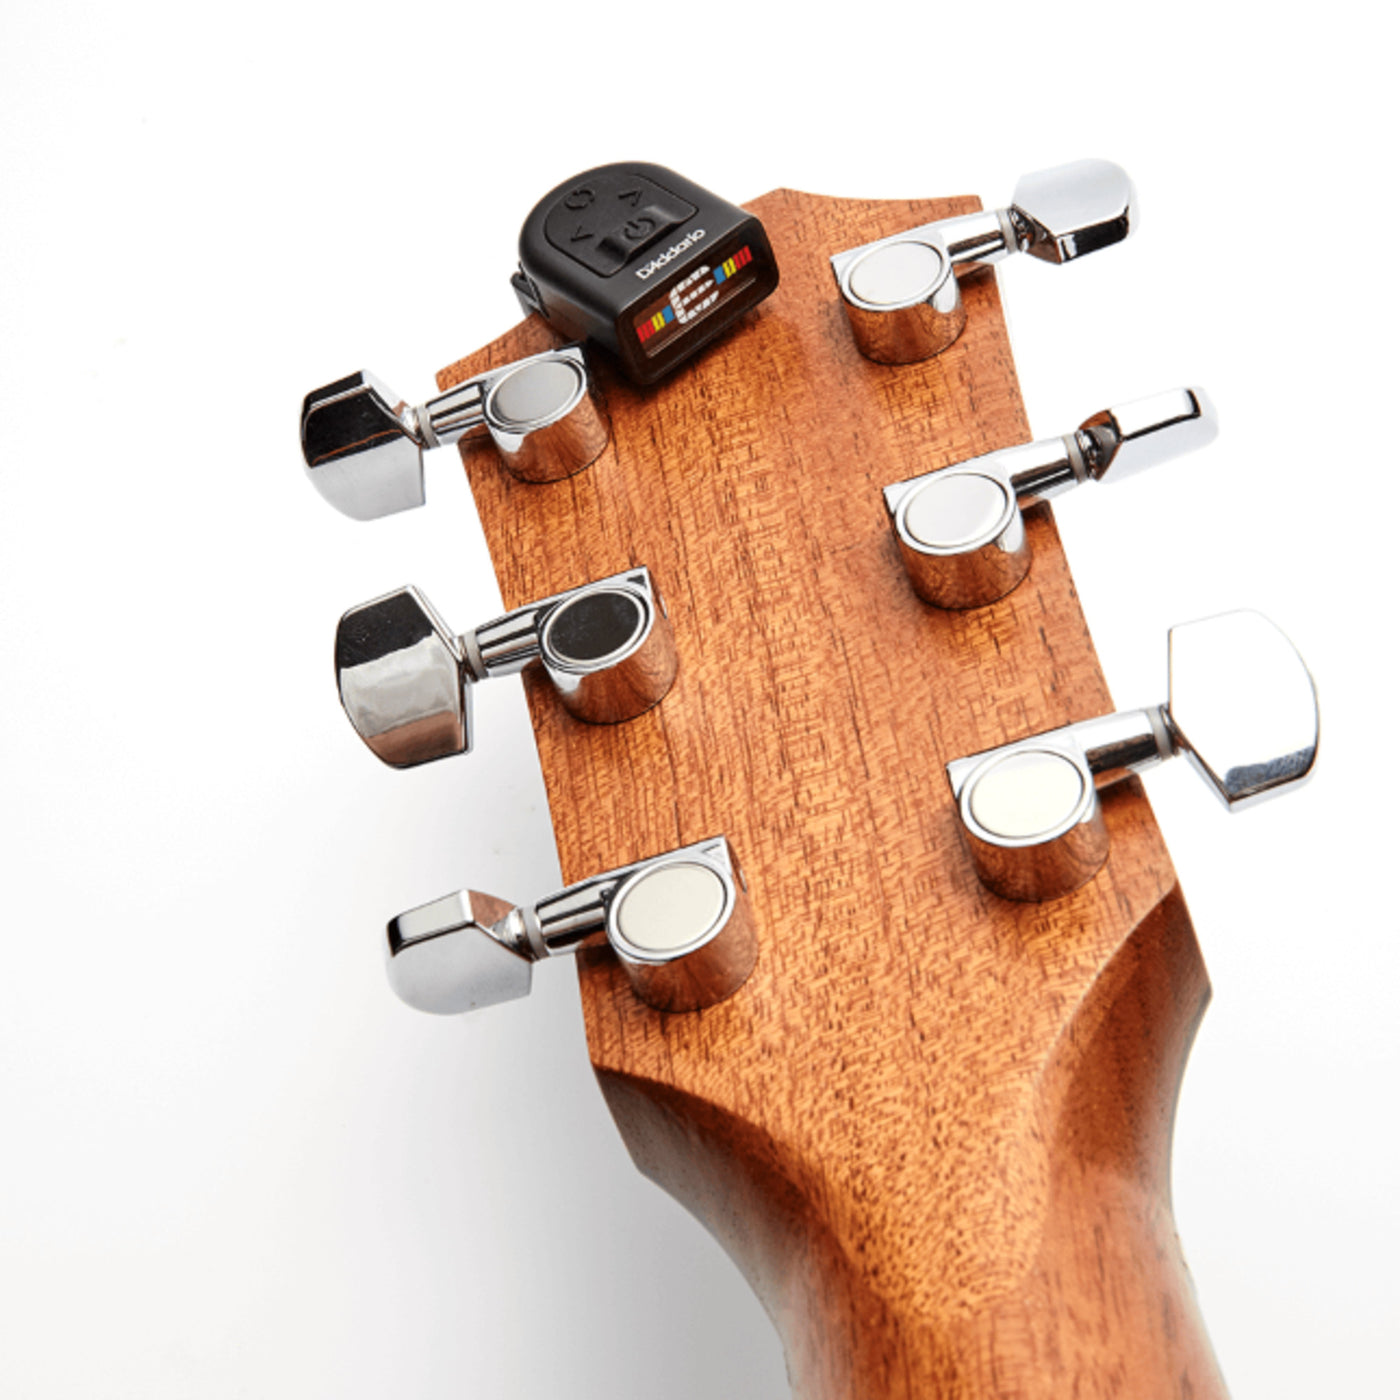 D'Addario Micro Headstock Tuner, 2-Pack (PW-CT-12TP)